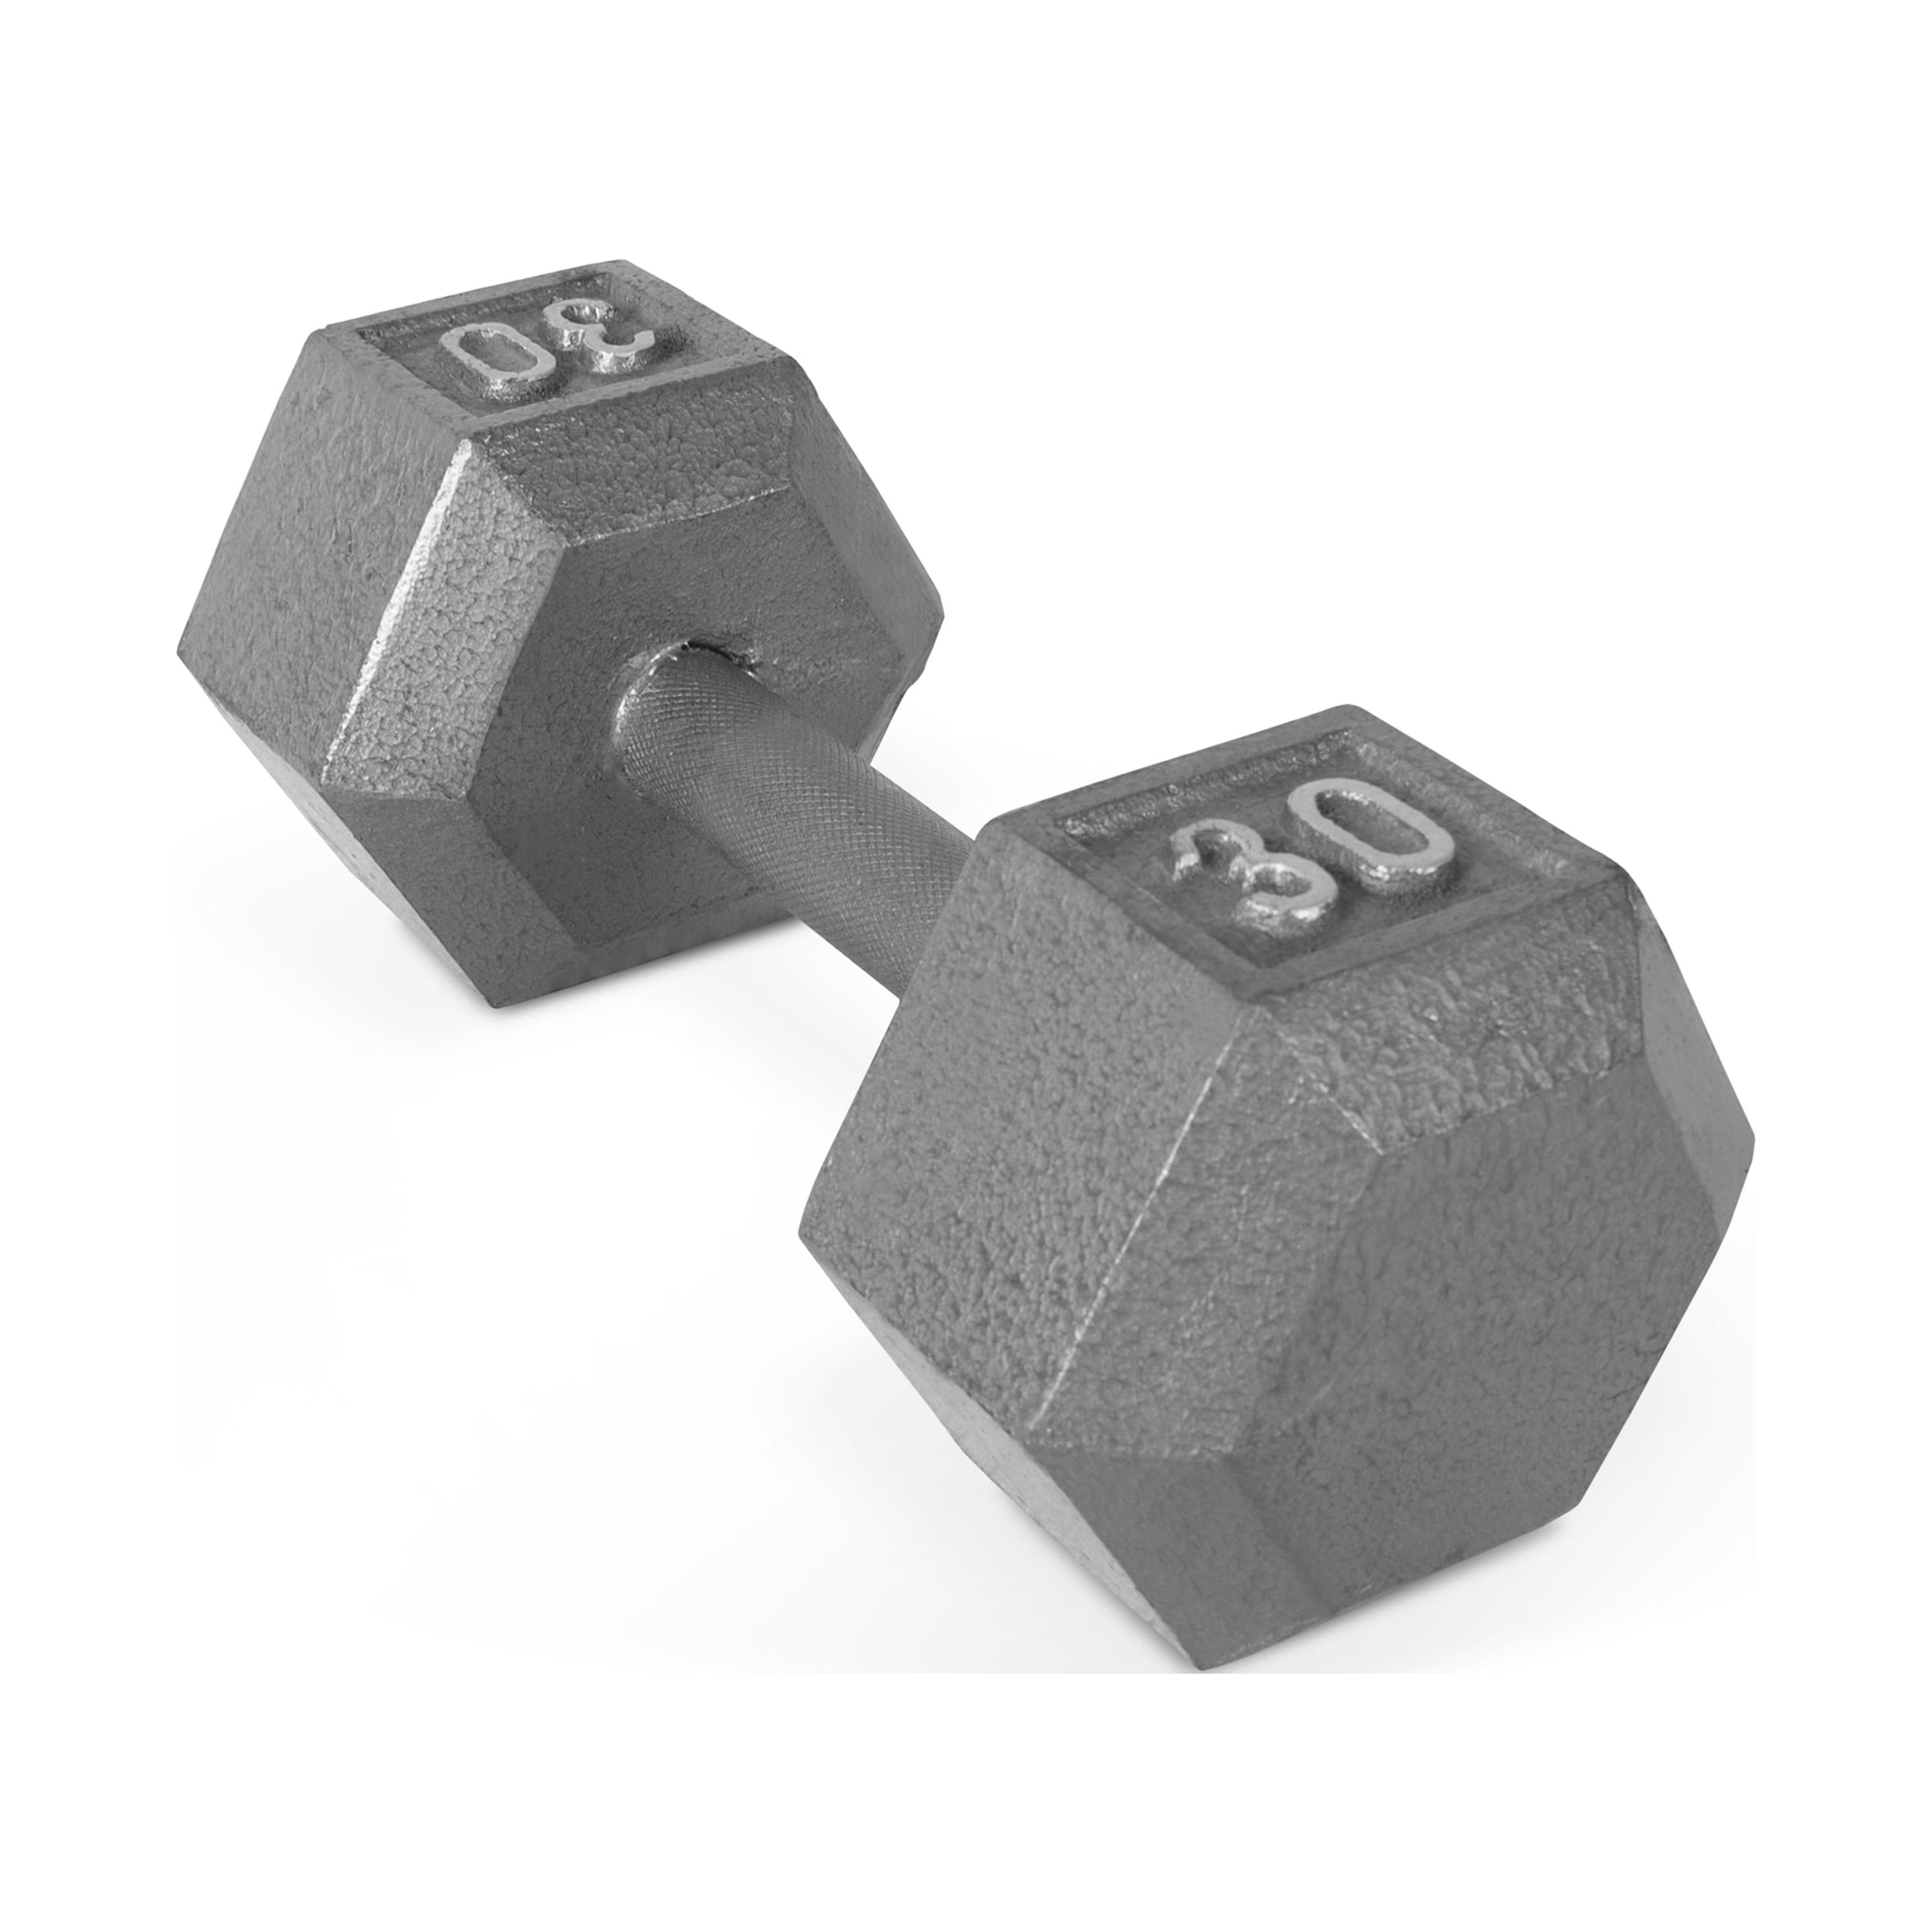 CAP Barbell 30lb Cast Iron Hex Dumbbell, Single - image 1 of 6